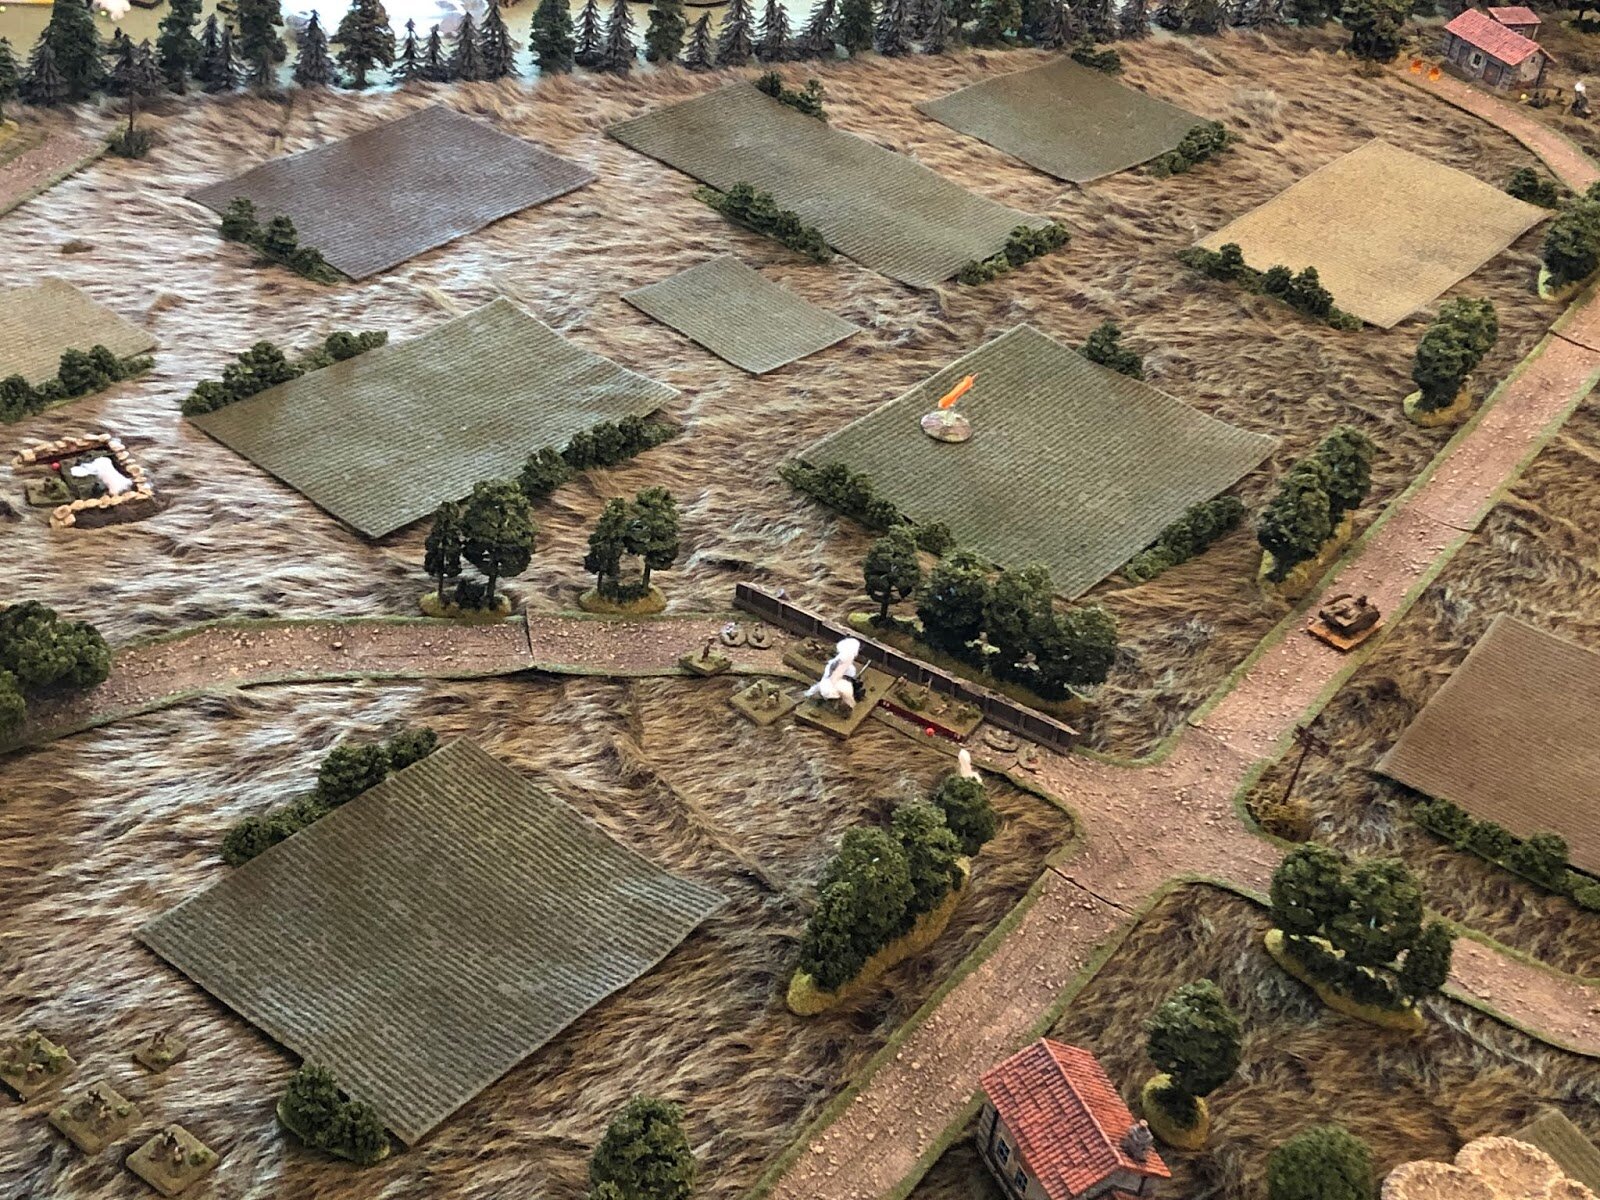 But freed up by the German 1st Company  being routed, the Soviet mortars (bottom left) now shift their focus to the German direct-fire support weapons (top right)...